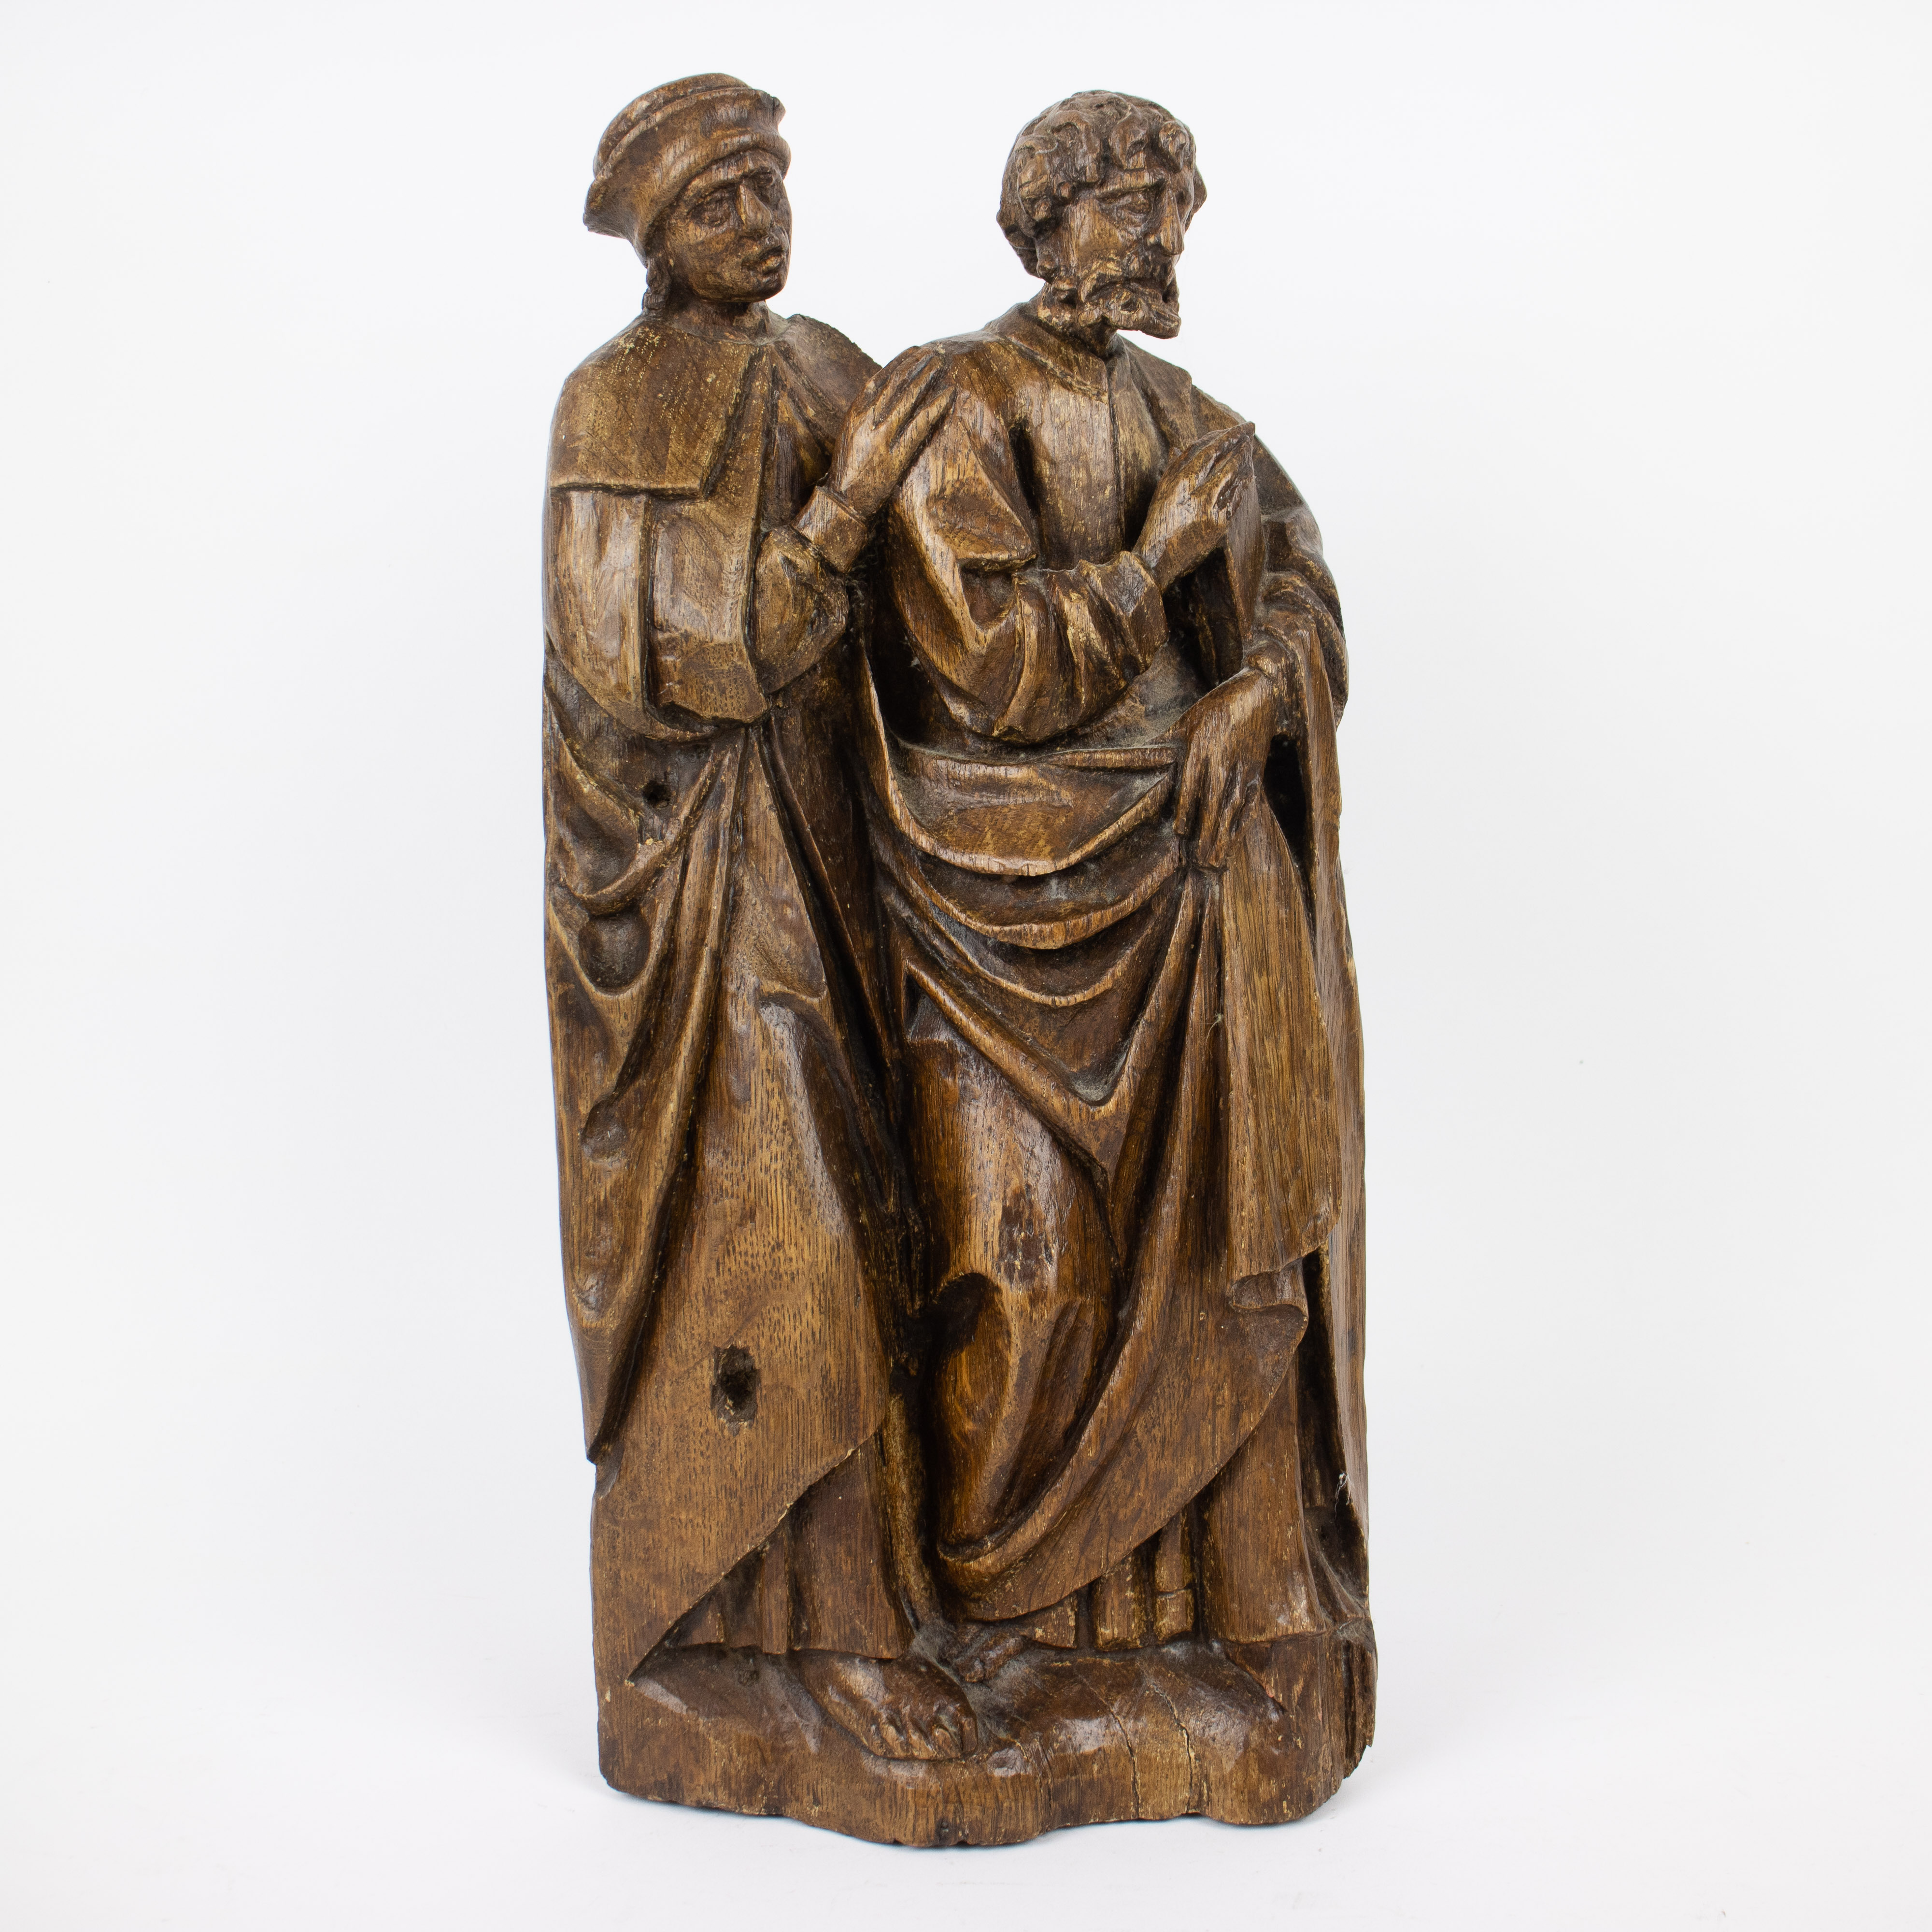 A carved wooden relief of two Saints, Flemish late 15th early 16th century